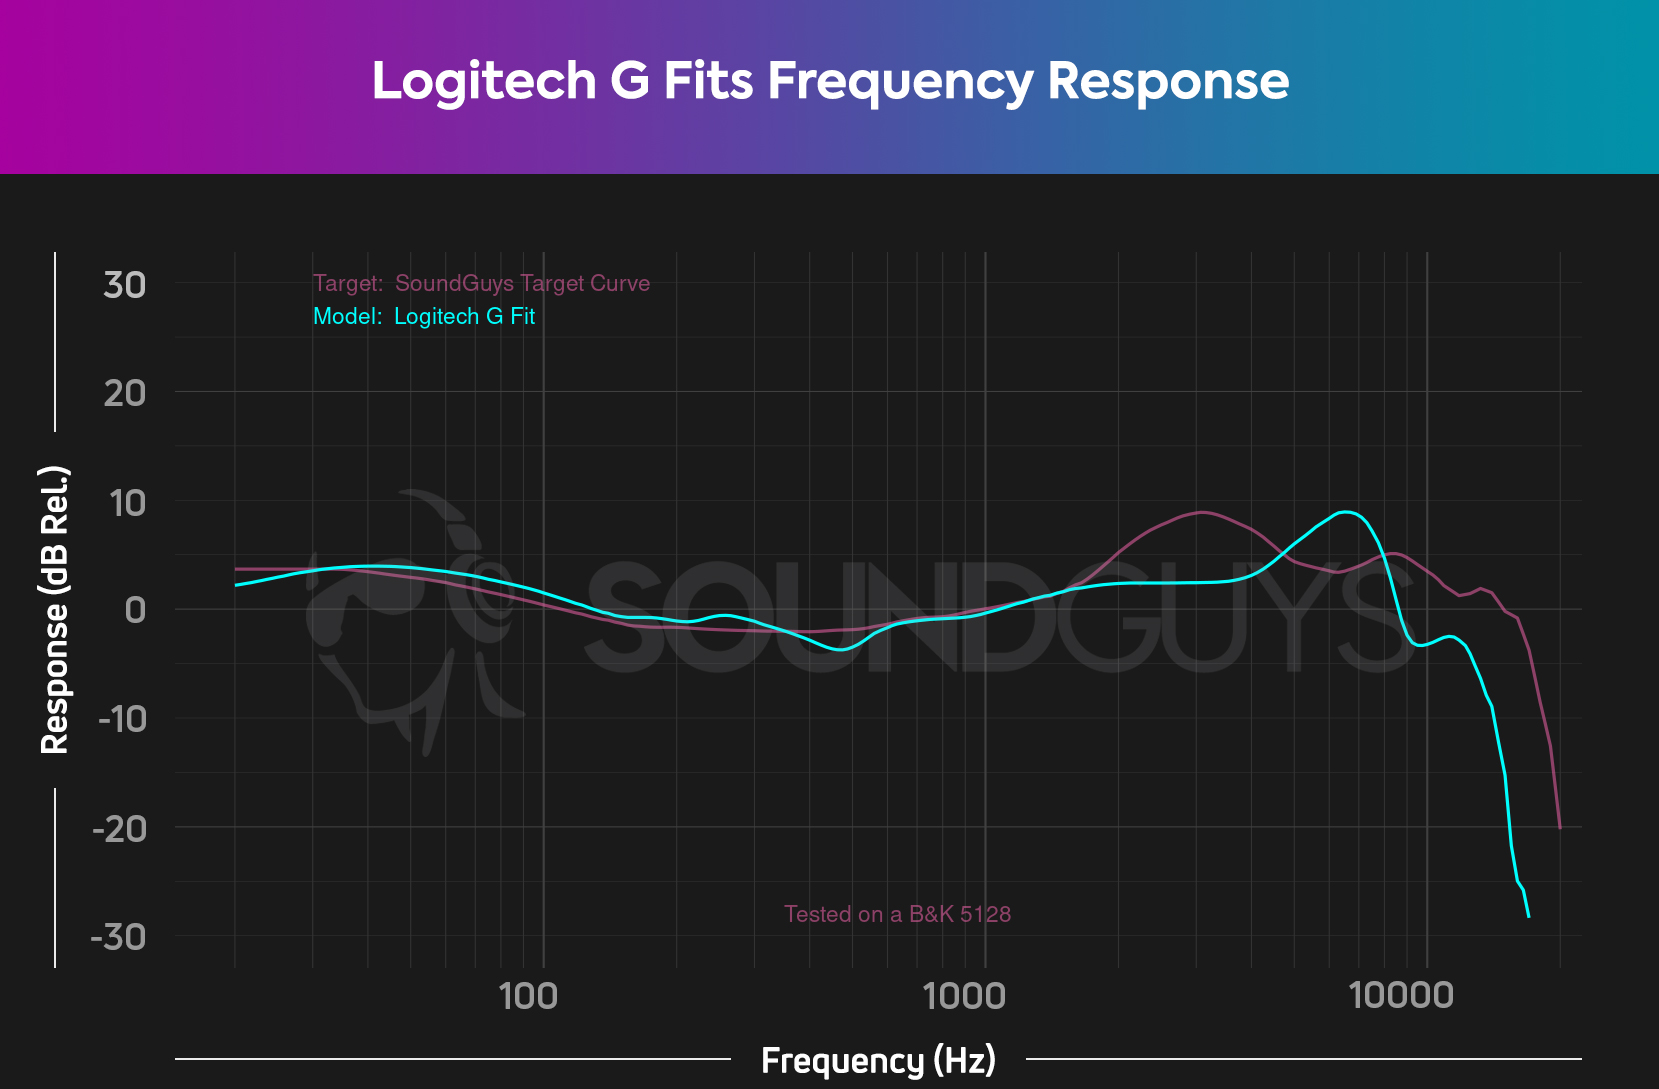 A frequency response chart for the Logitech G Fits earbuds, which shows a pretty close output to our in house curve.